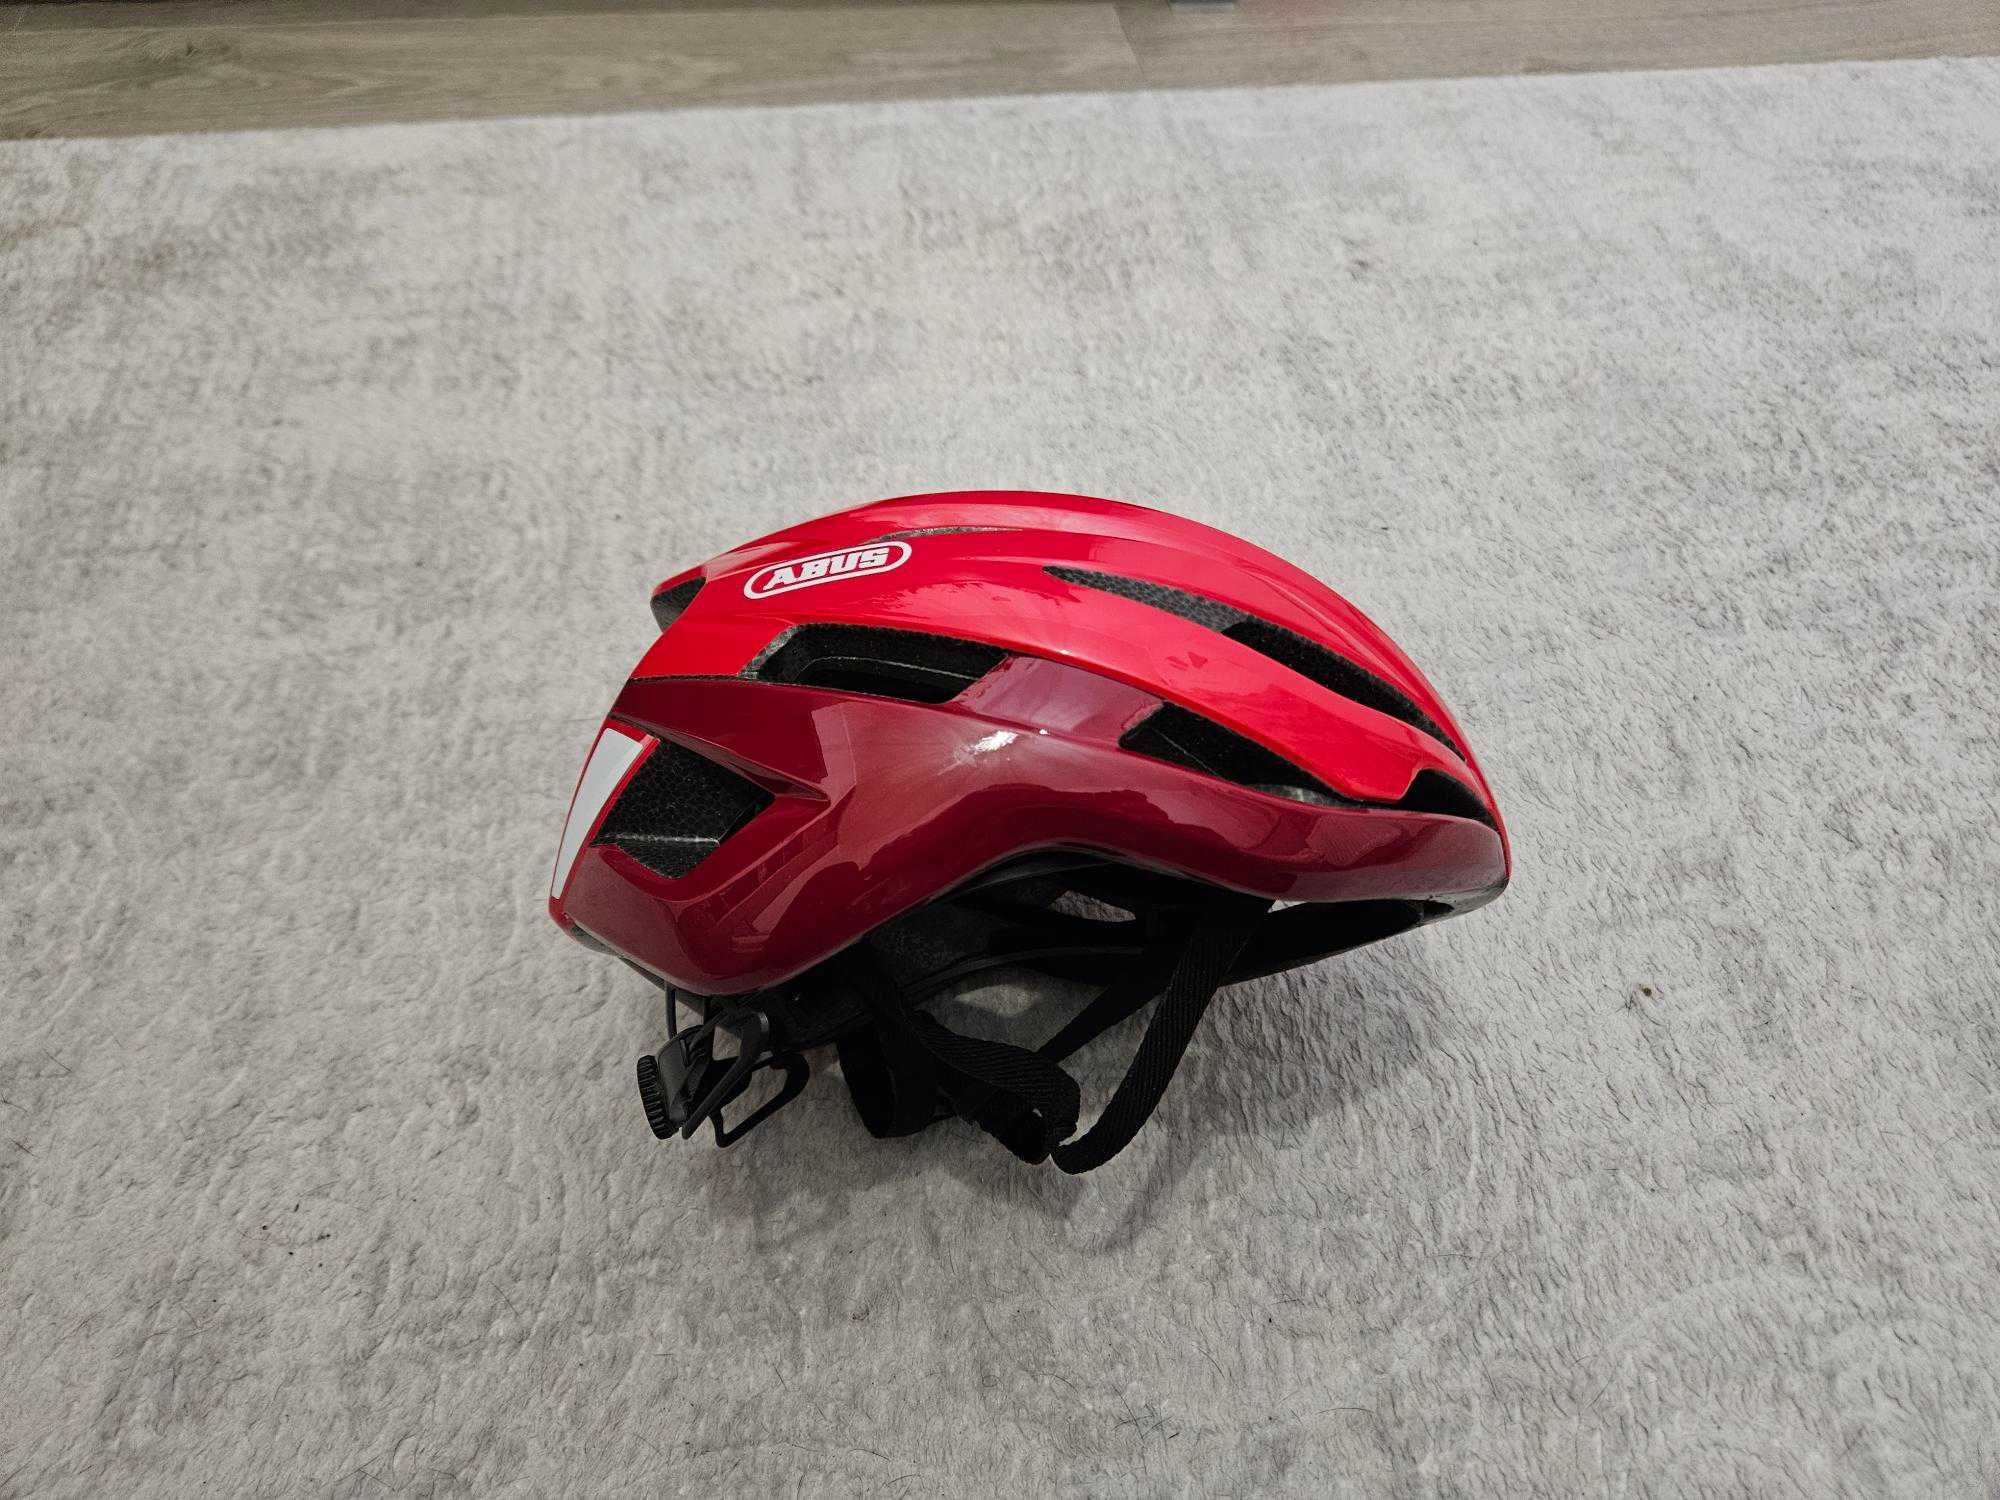 Kask rowerowy Abus Stormchaser rozm. M (54-58)